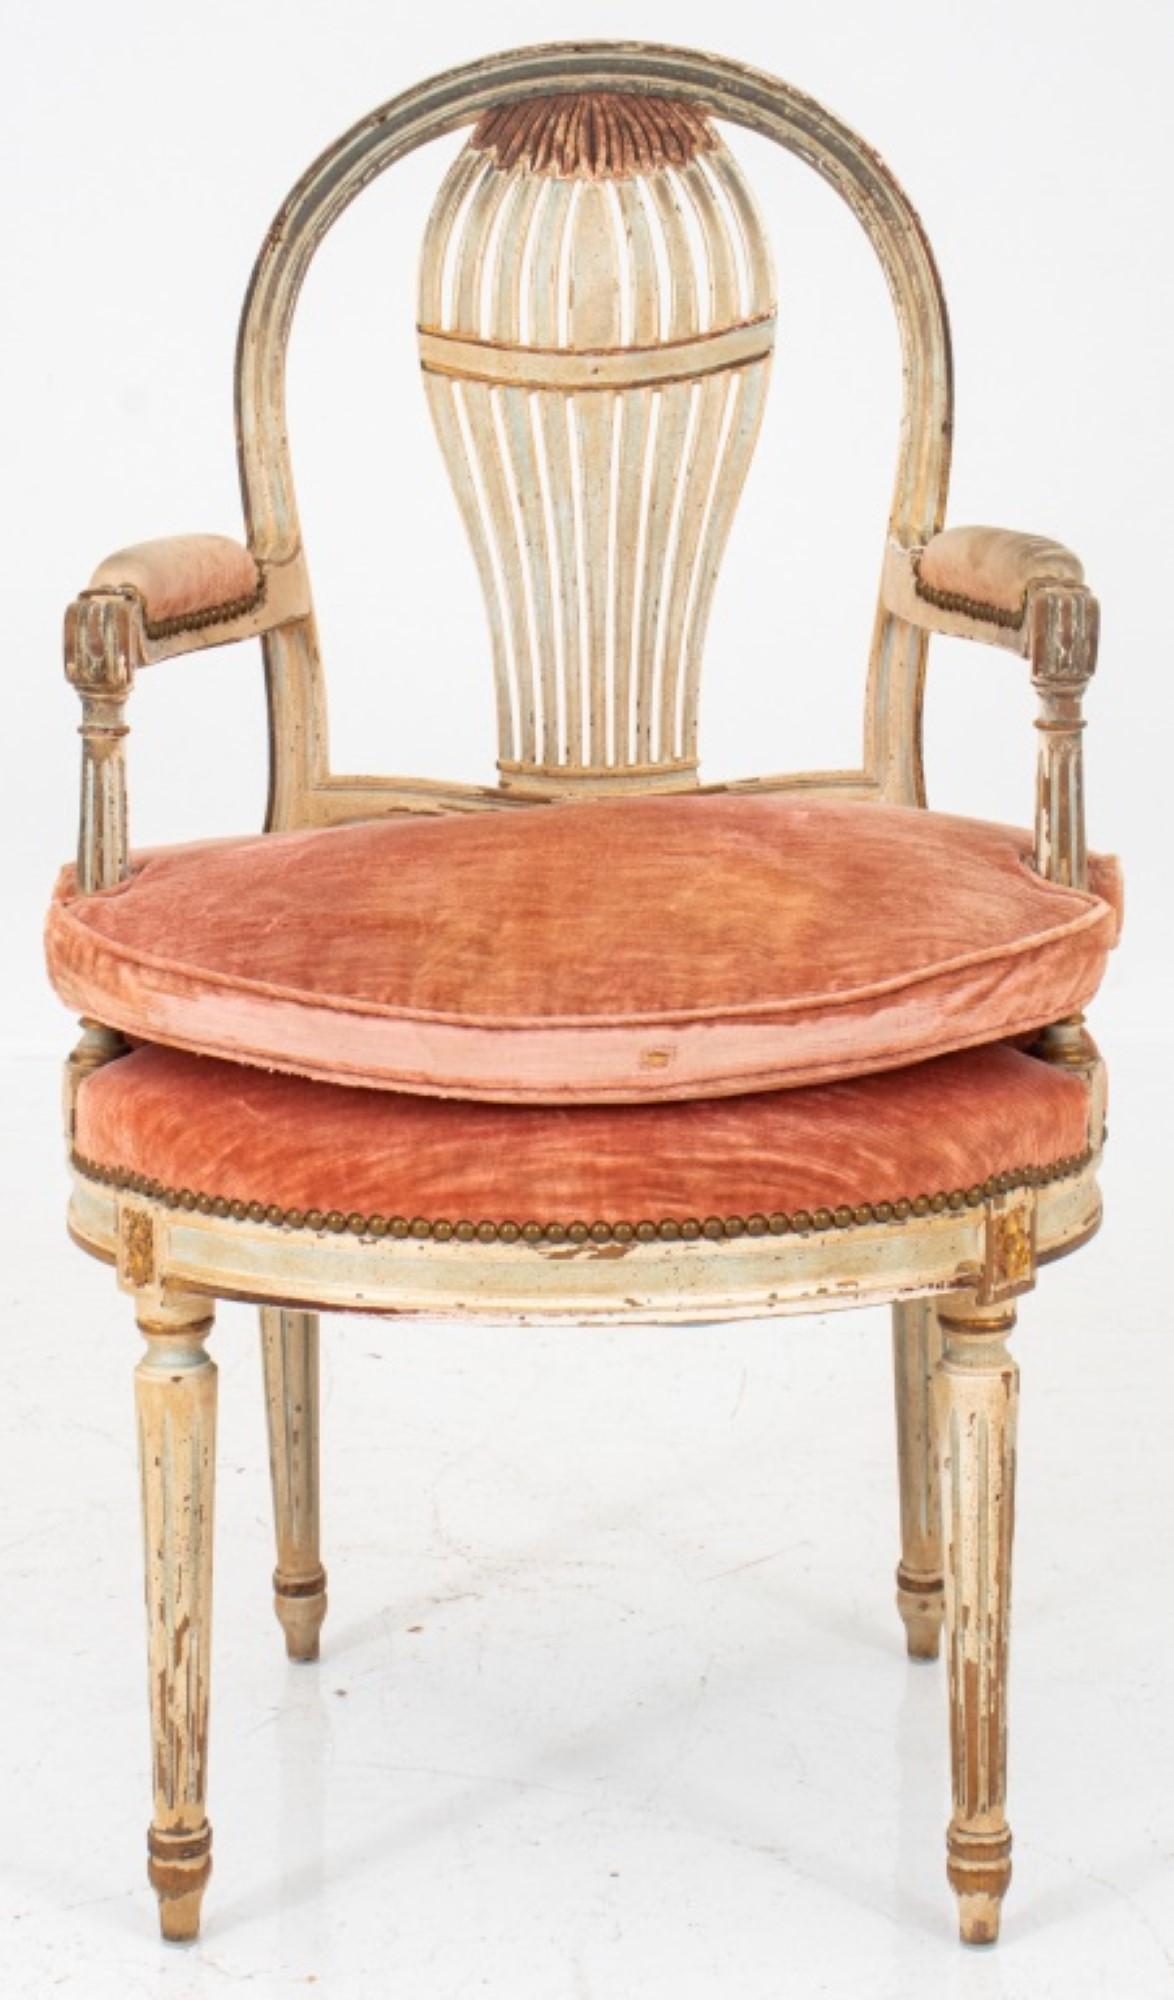 Louis XVI style balloon back painted armchair, or, a fauteuil a la reine 